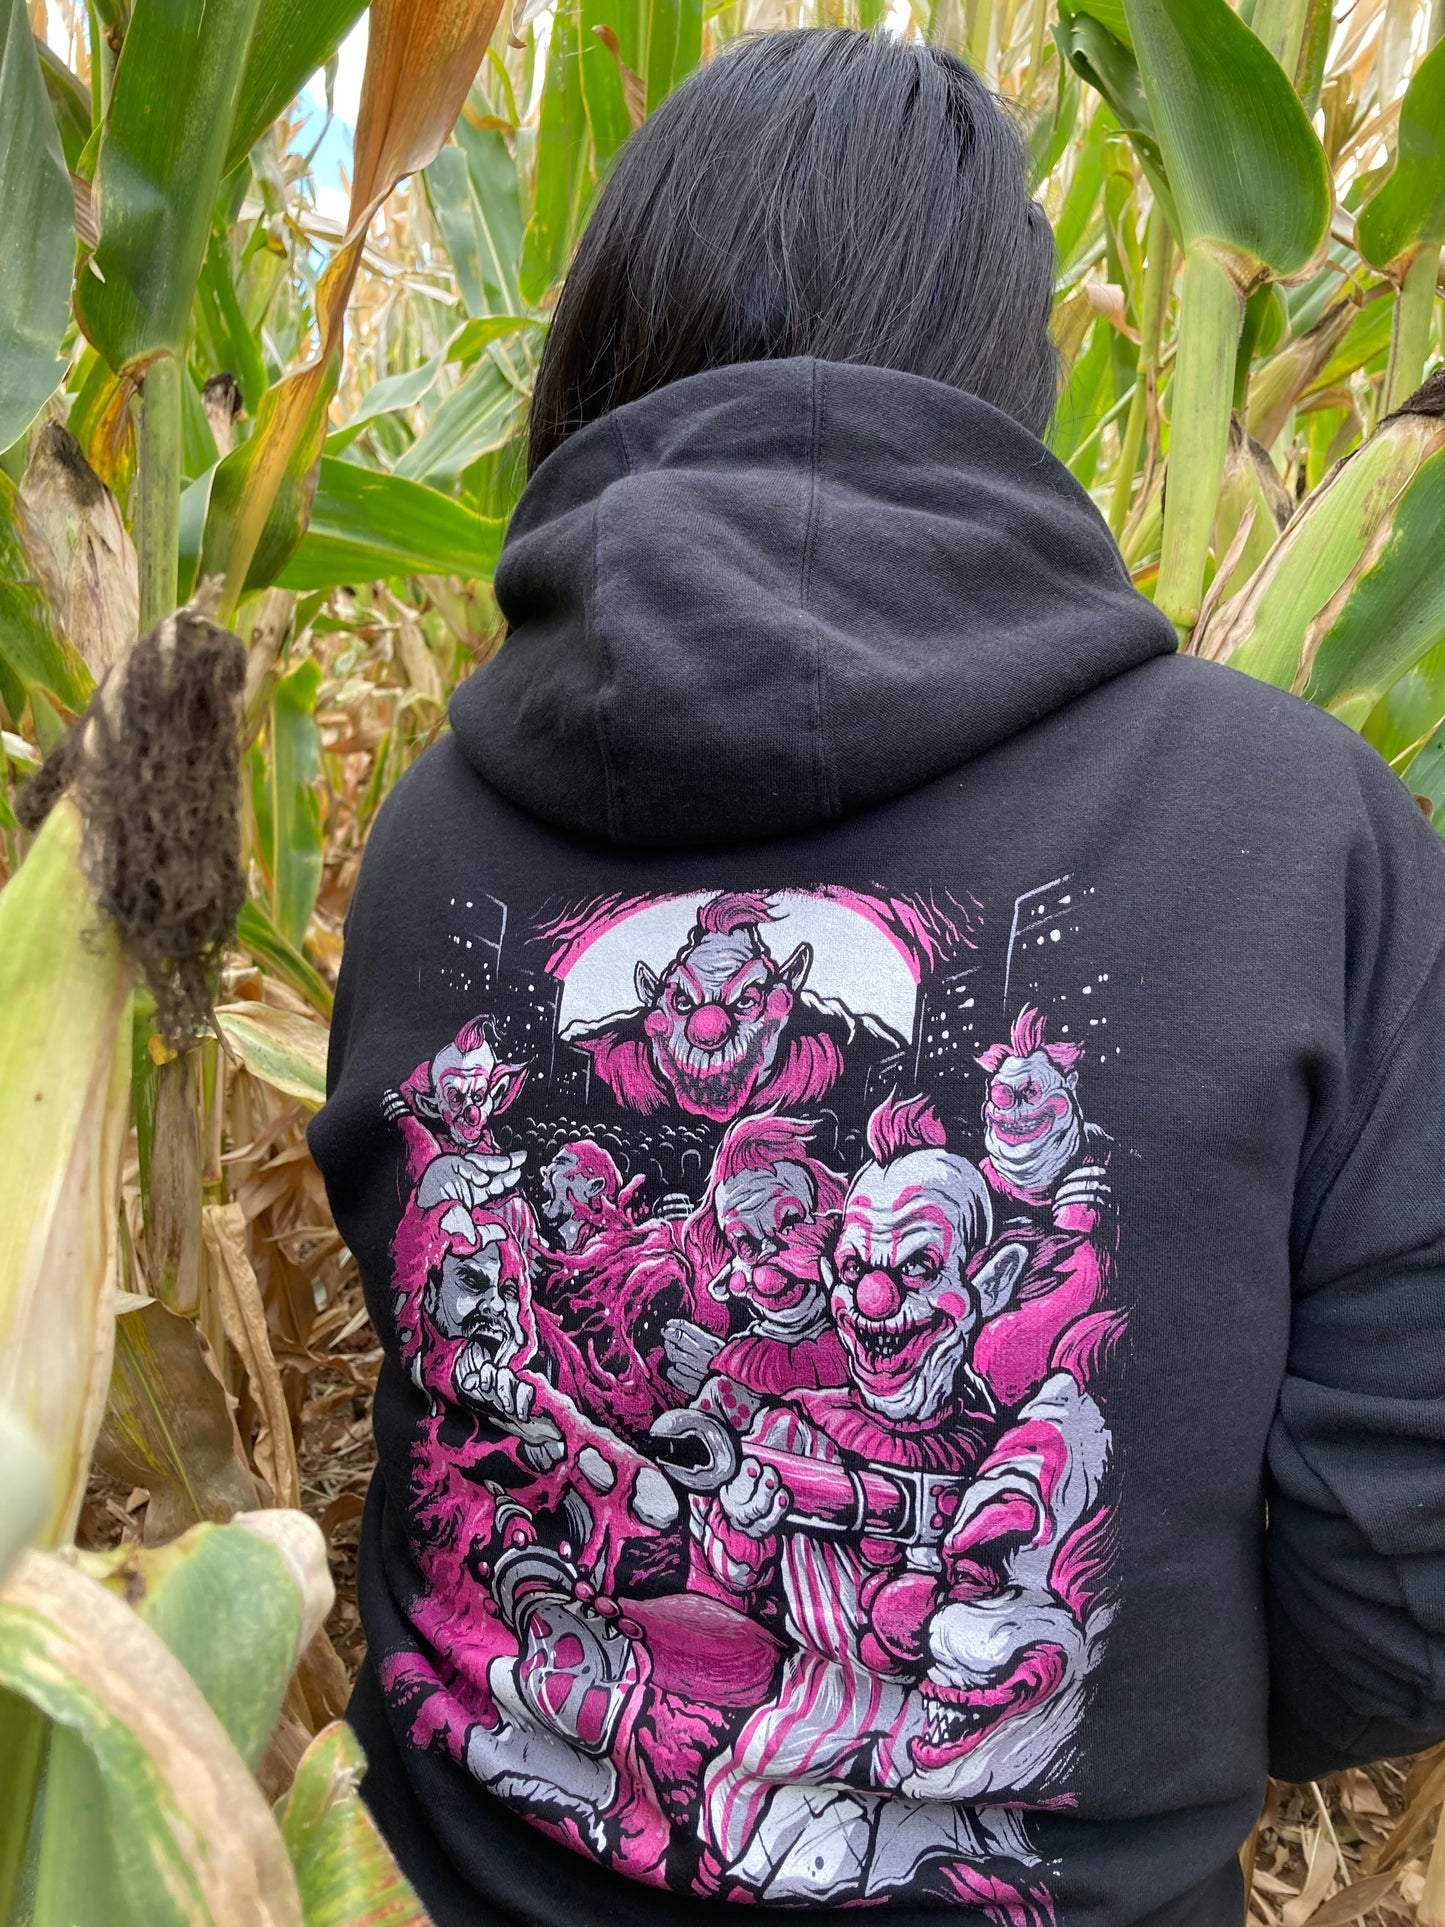 Attack of the Killer Klowns - Unisex Hoodie